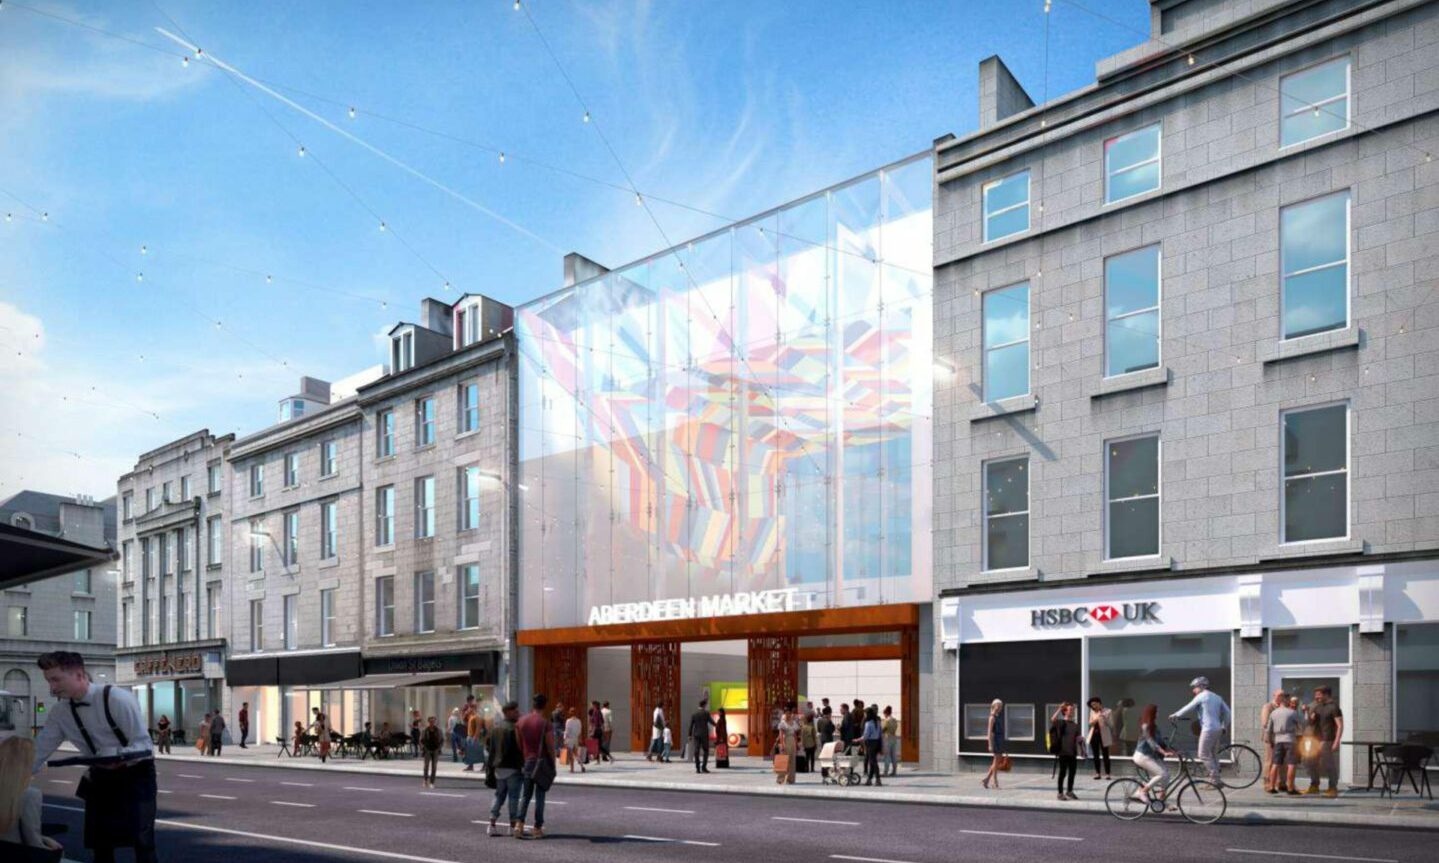 An impression of how the new Aberdeen Market could look facing onto Union Street, with a glass front and red pillars at the entrance.